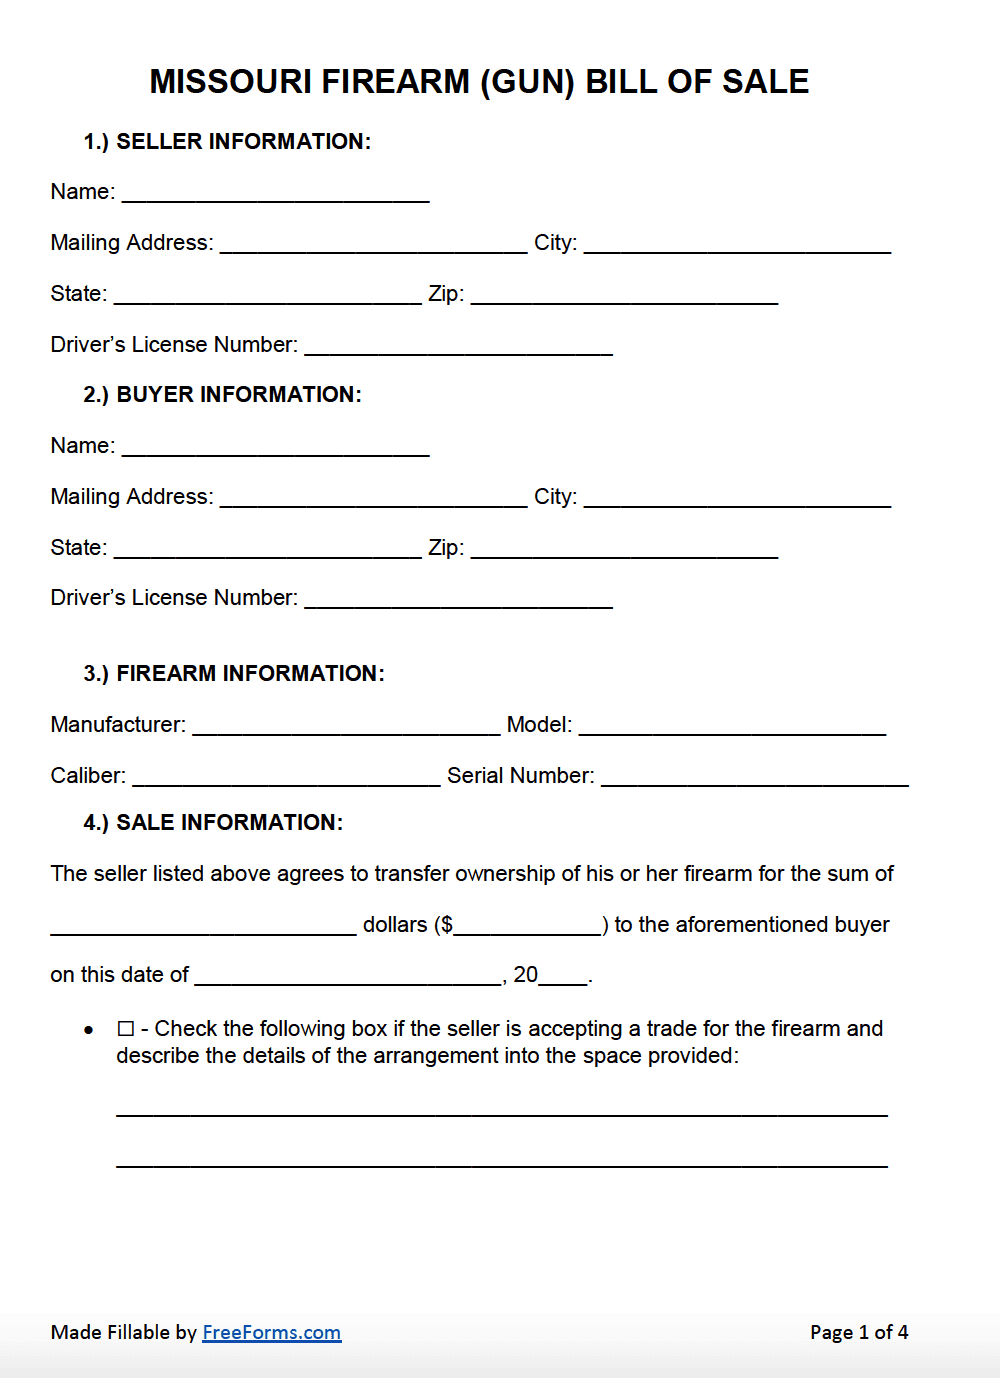 missouri-bill-of-sale-form-free-templates-in-pdf-word-excel-to-print